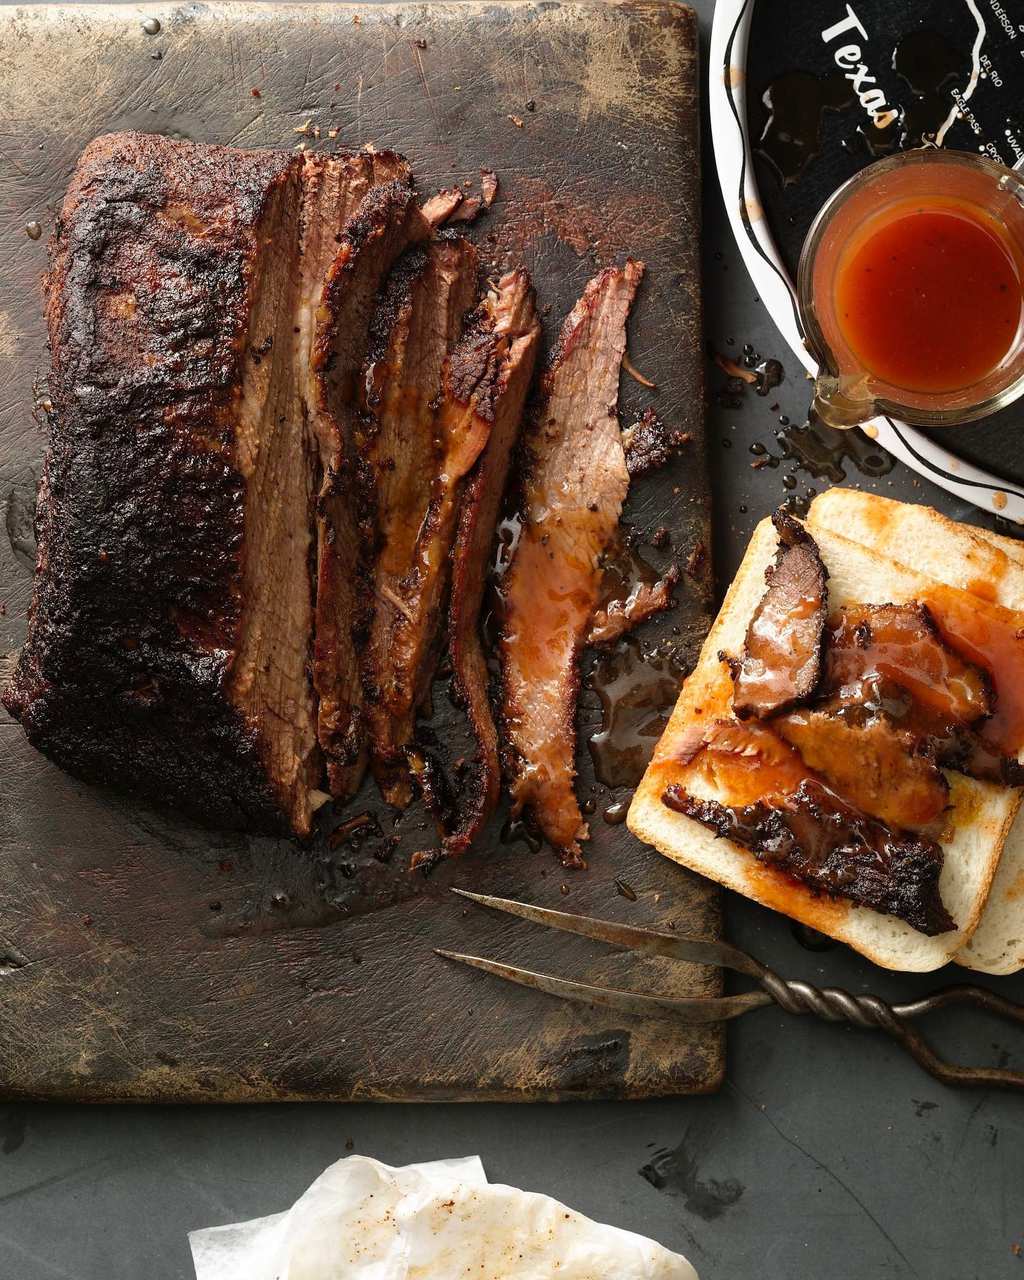 Sliced brisket on rustic board and toast with sauce on the side